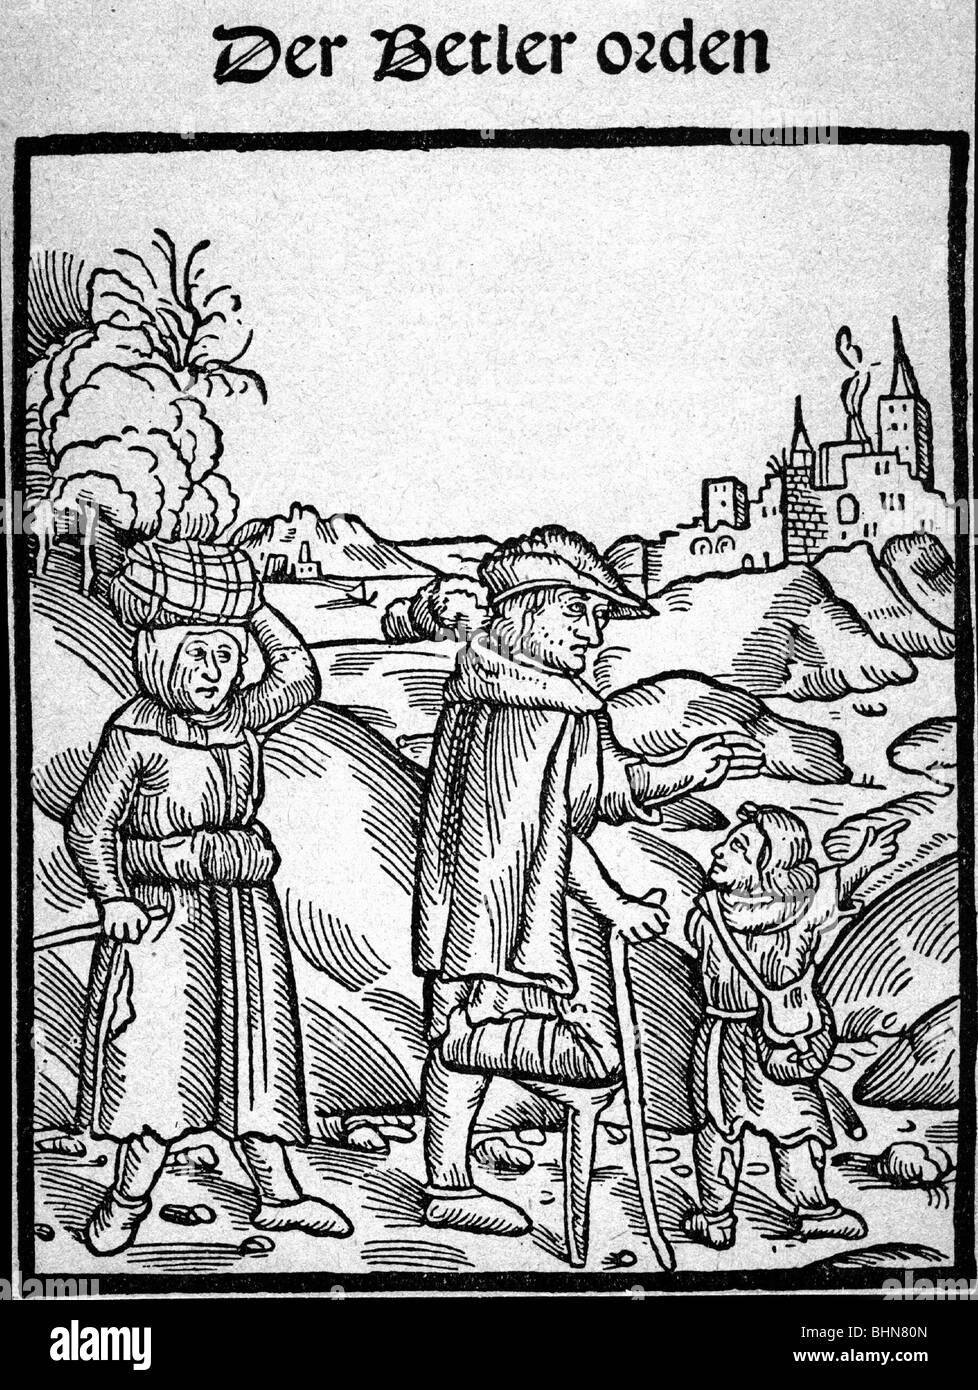 people, poverty, misery, medieval times, Middle Ages, beggar, title of a book which is warning about beggars, woodcut, circa 1500, Stock Photo